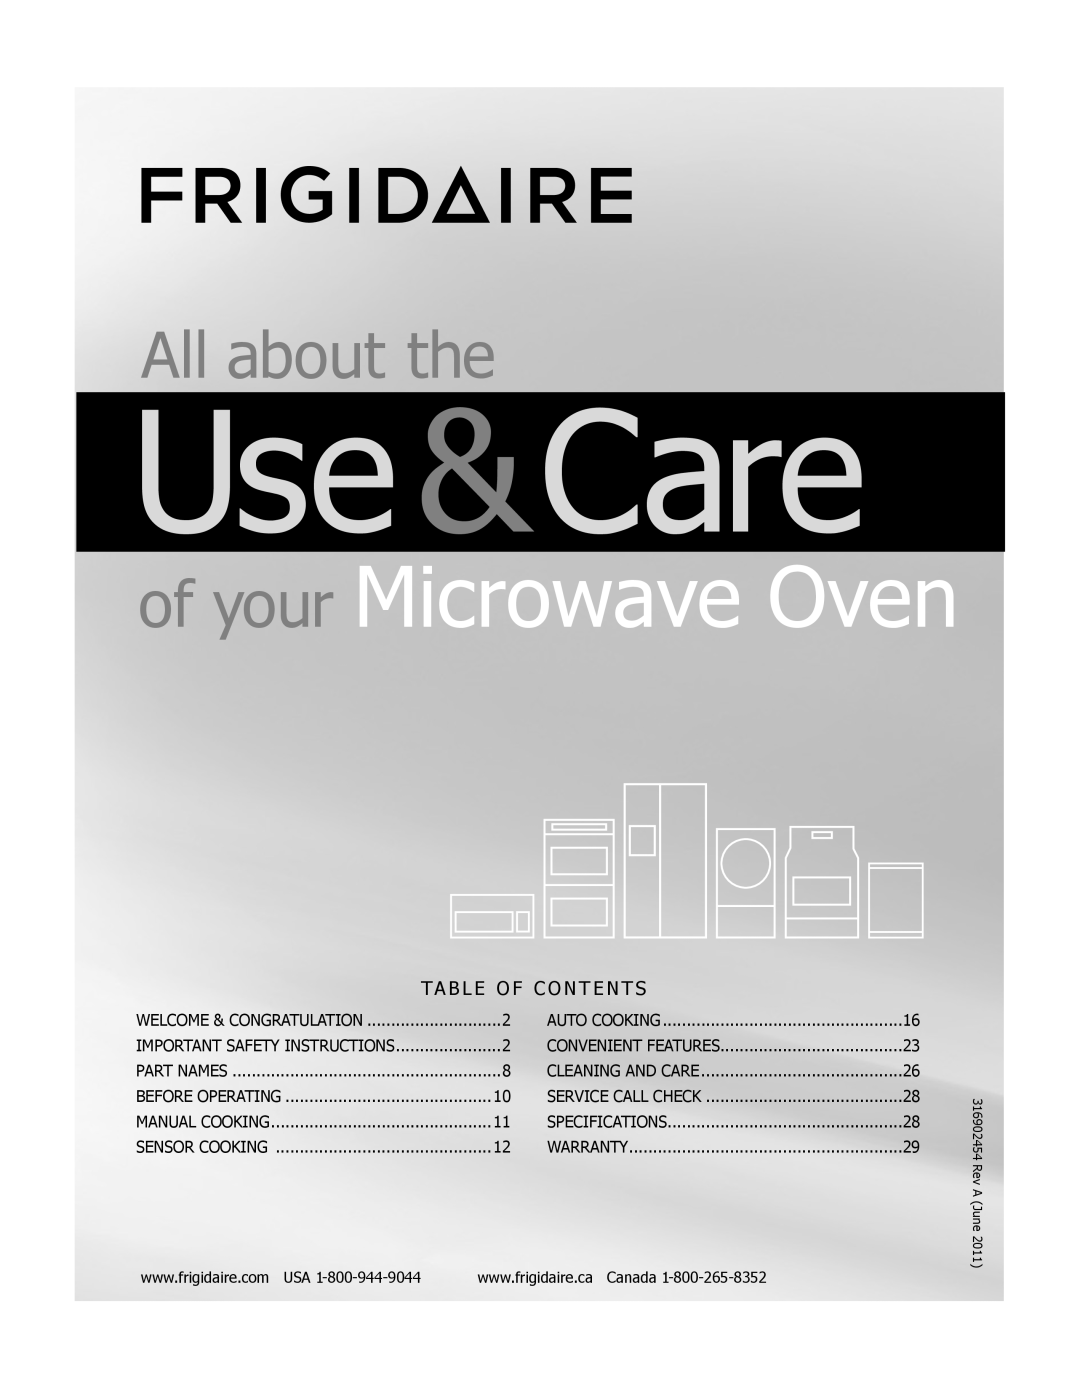 Frigidaire FPBM189K dimensions Performance-DrivenStyle, More Easy-To-UseFeatures, One-TouchOptions, Capacity, Available in 